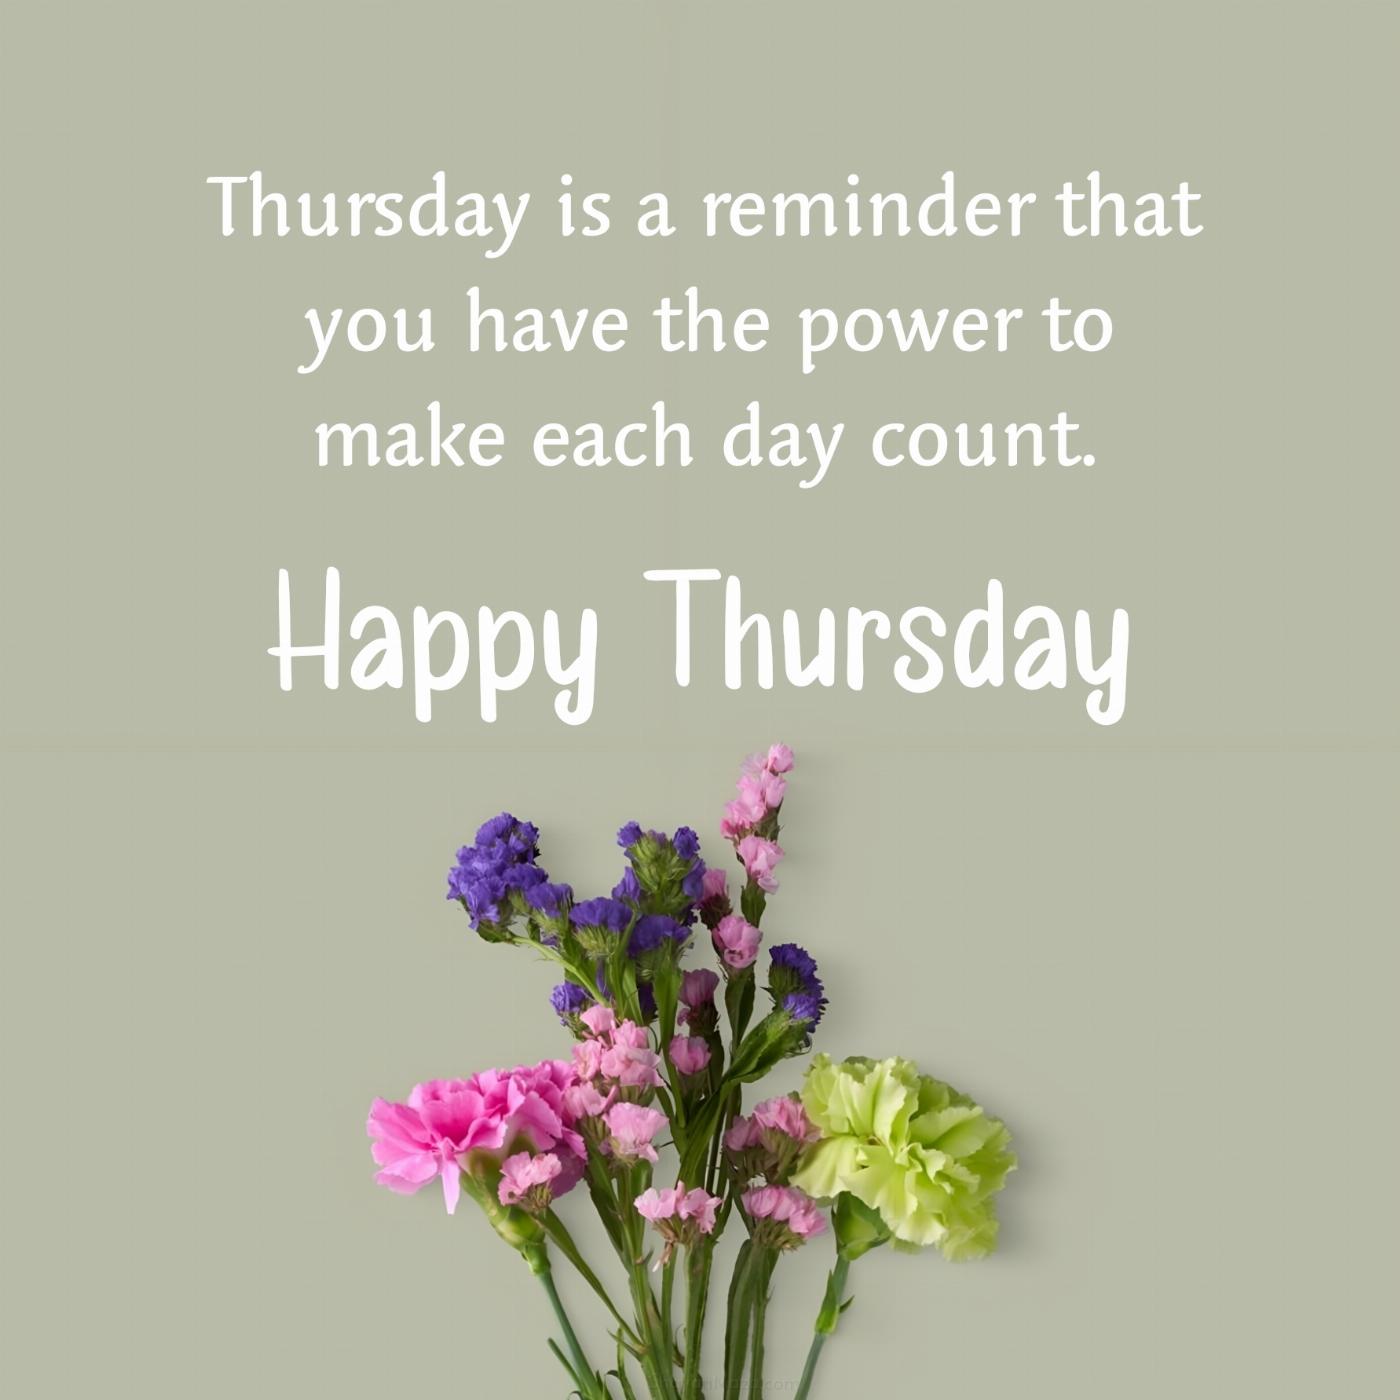 Thursday is a reminder that you have the power to make